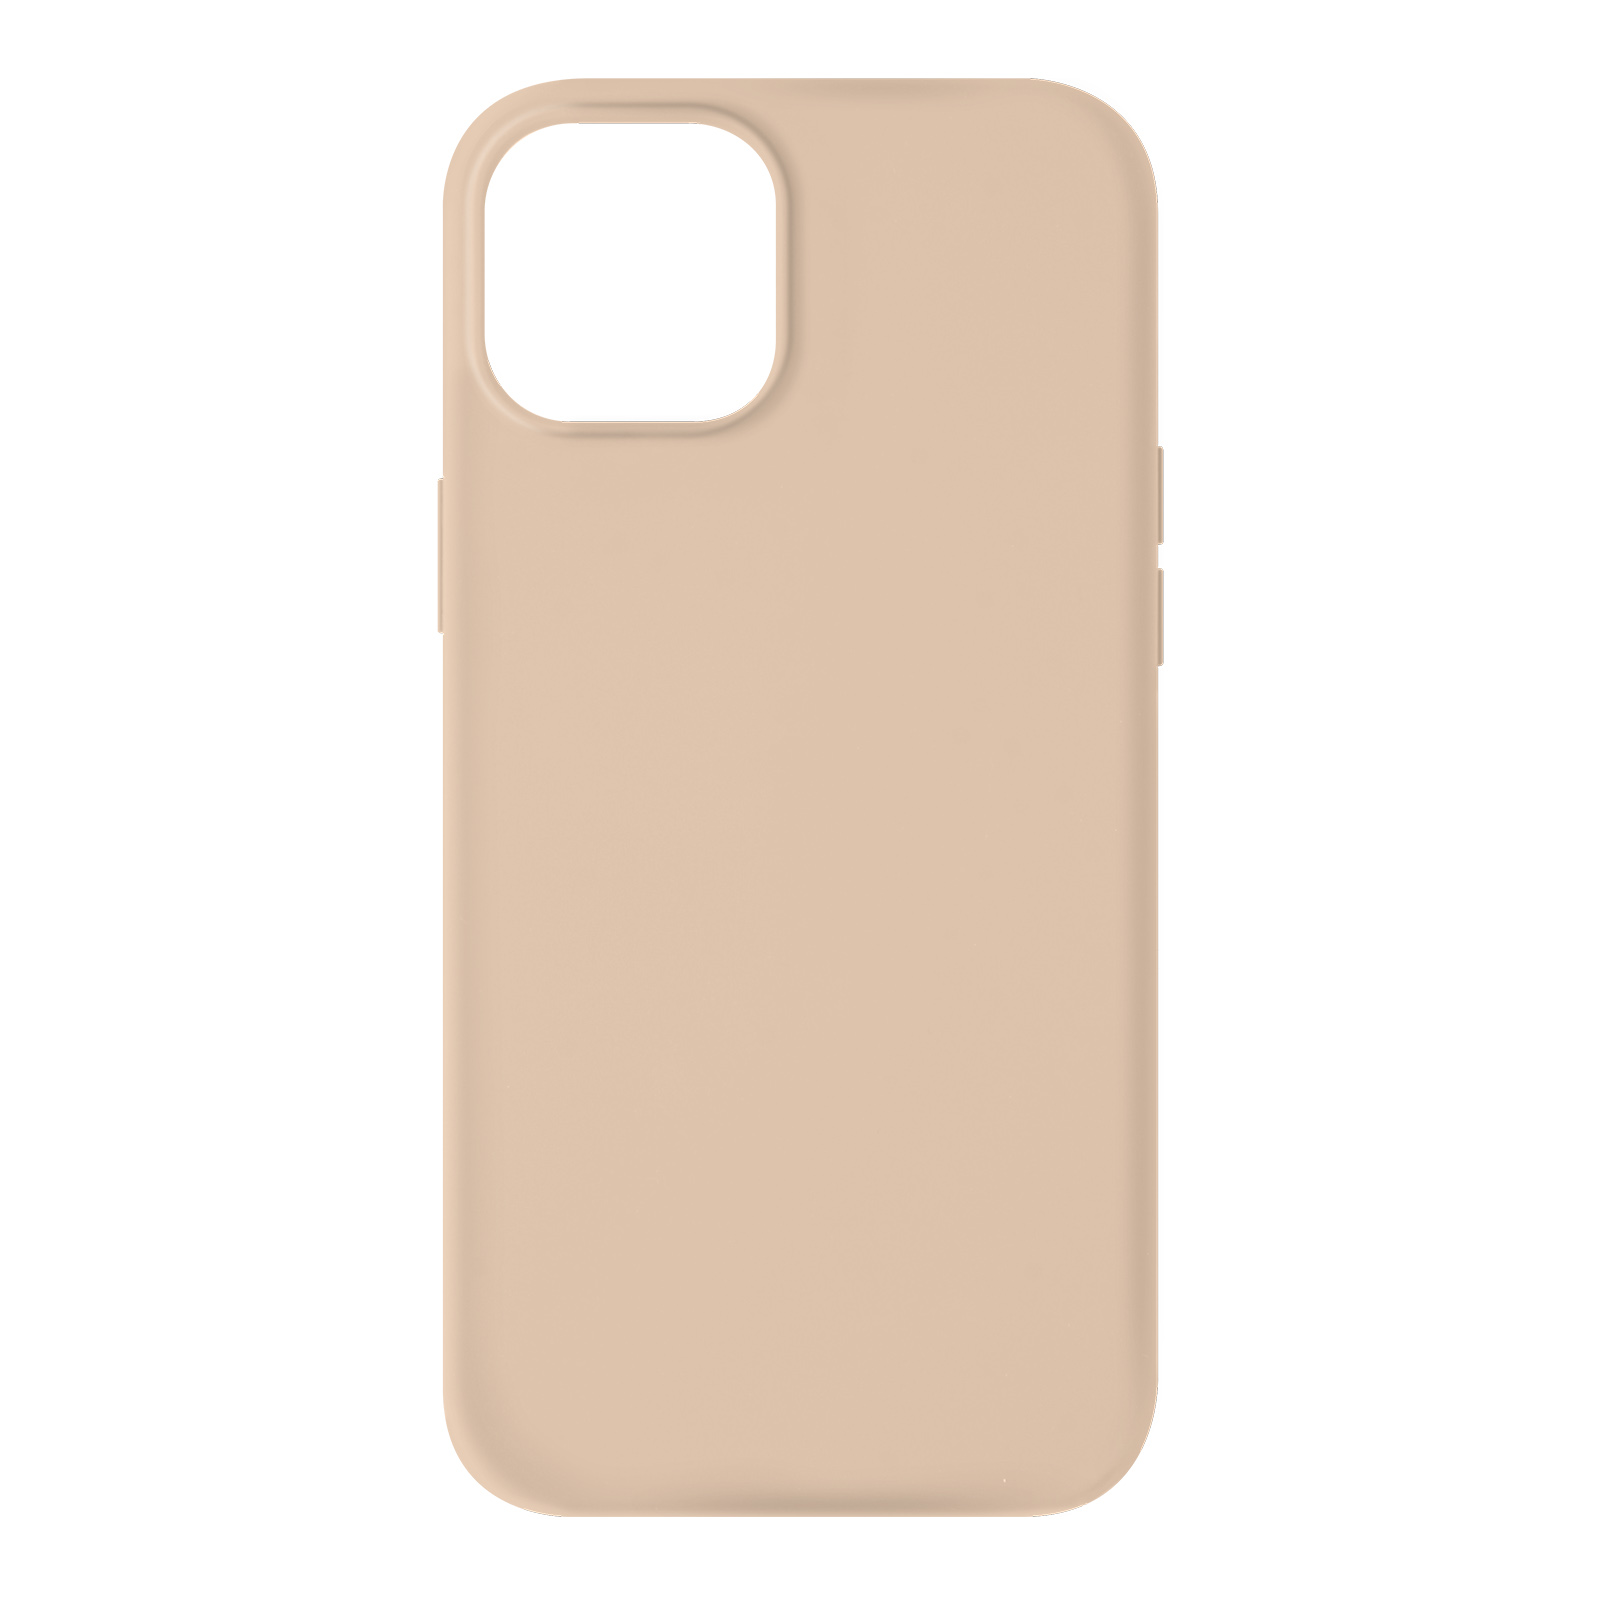 13, Series, Backcover, AVIZAR Likid Apple, Rosegold iPhone